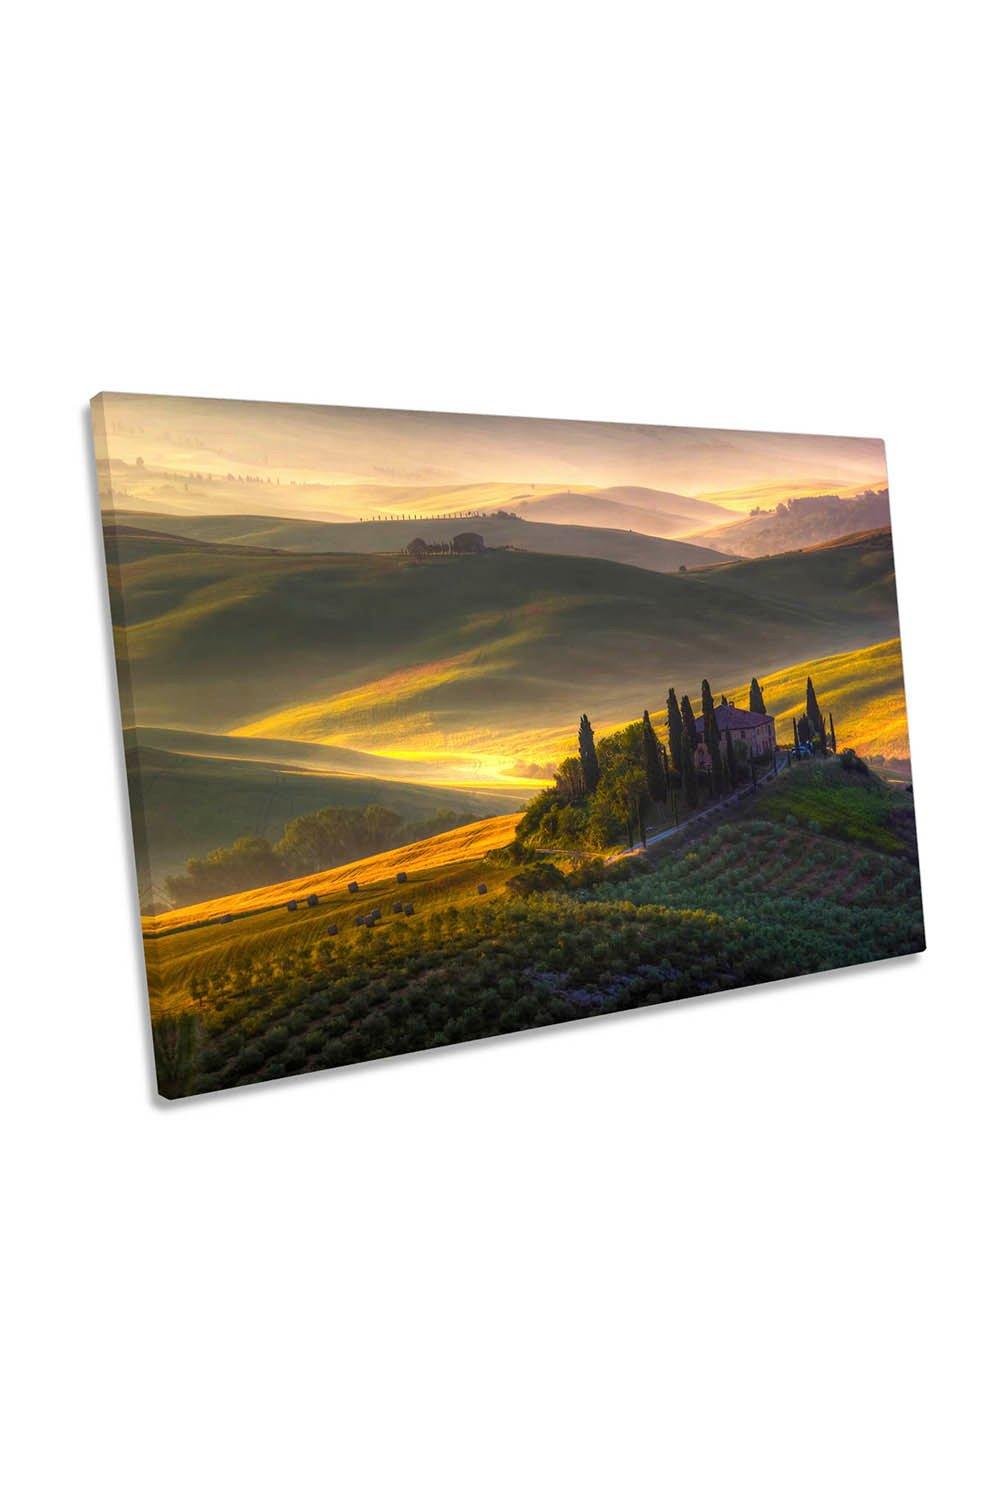 Of Green and Gold Tuscany Morning Canvas Wall Art Picture Print